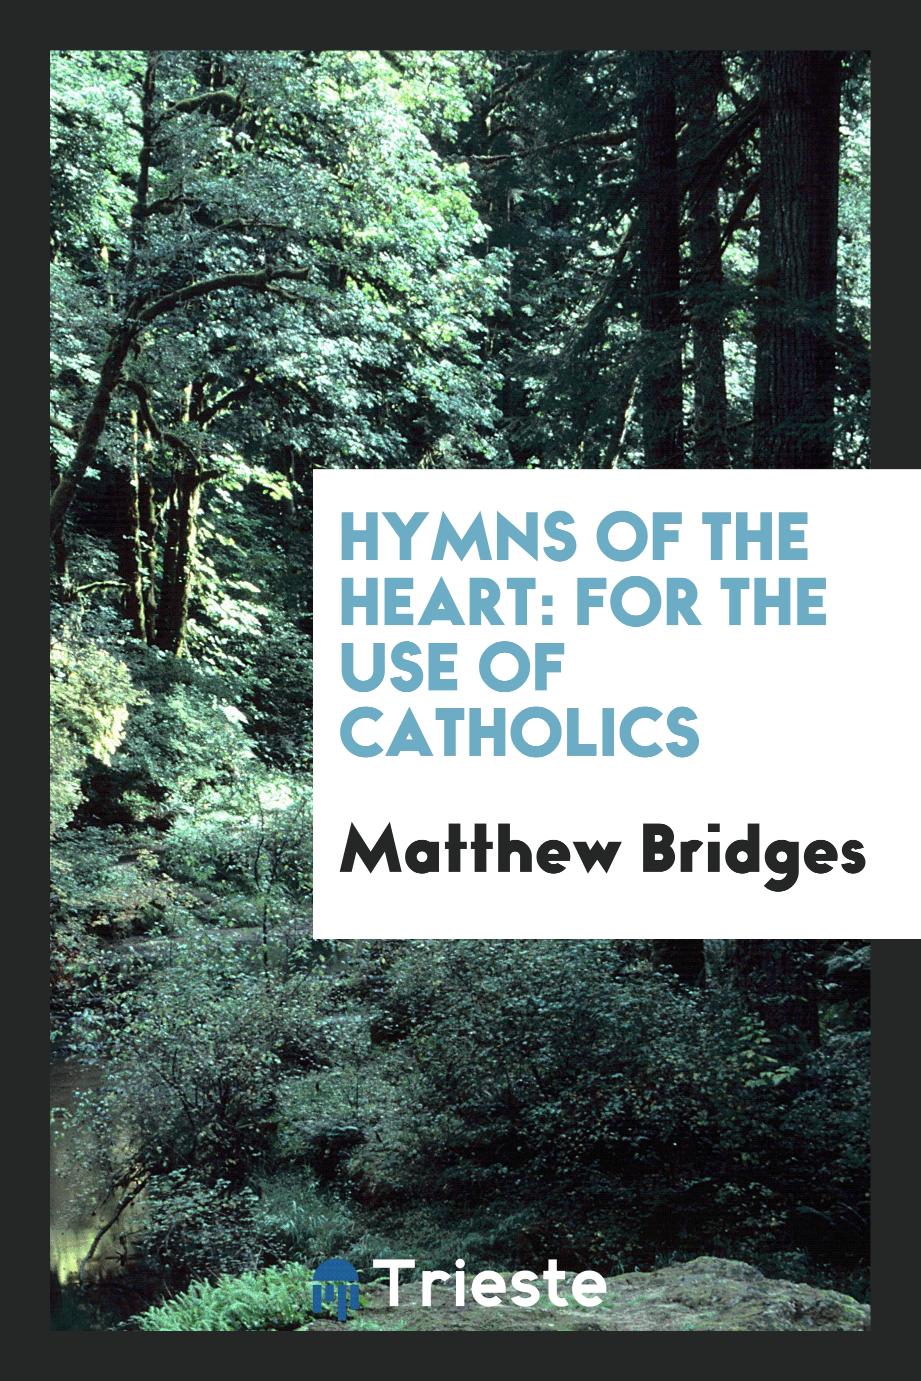 Hymns of the Heart: For the Use of Catholics